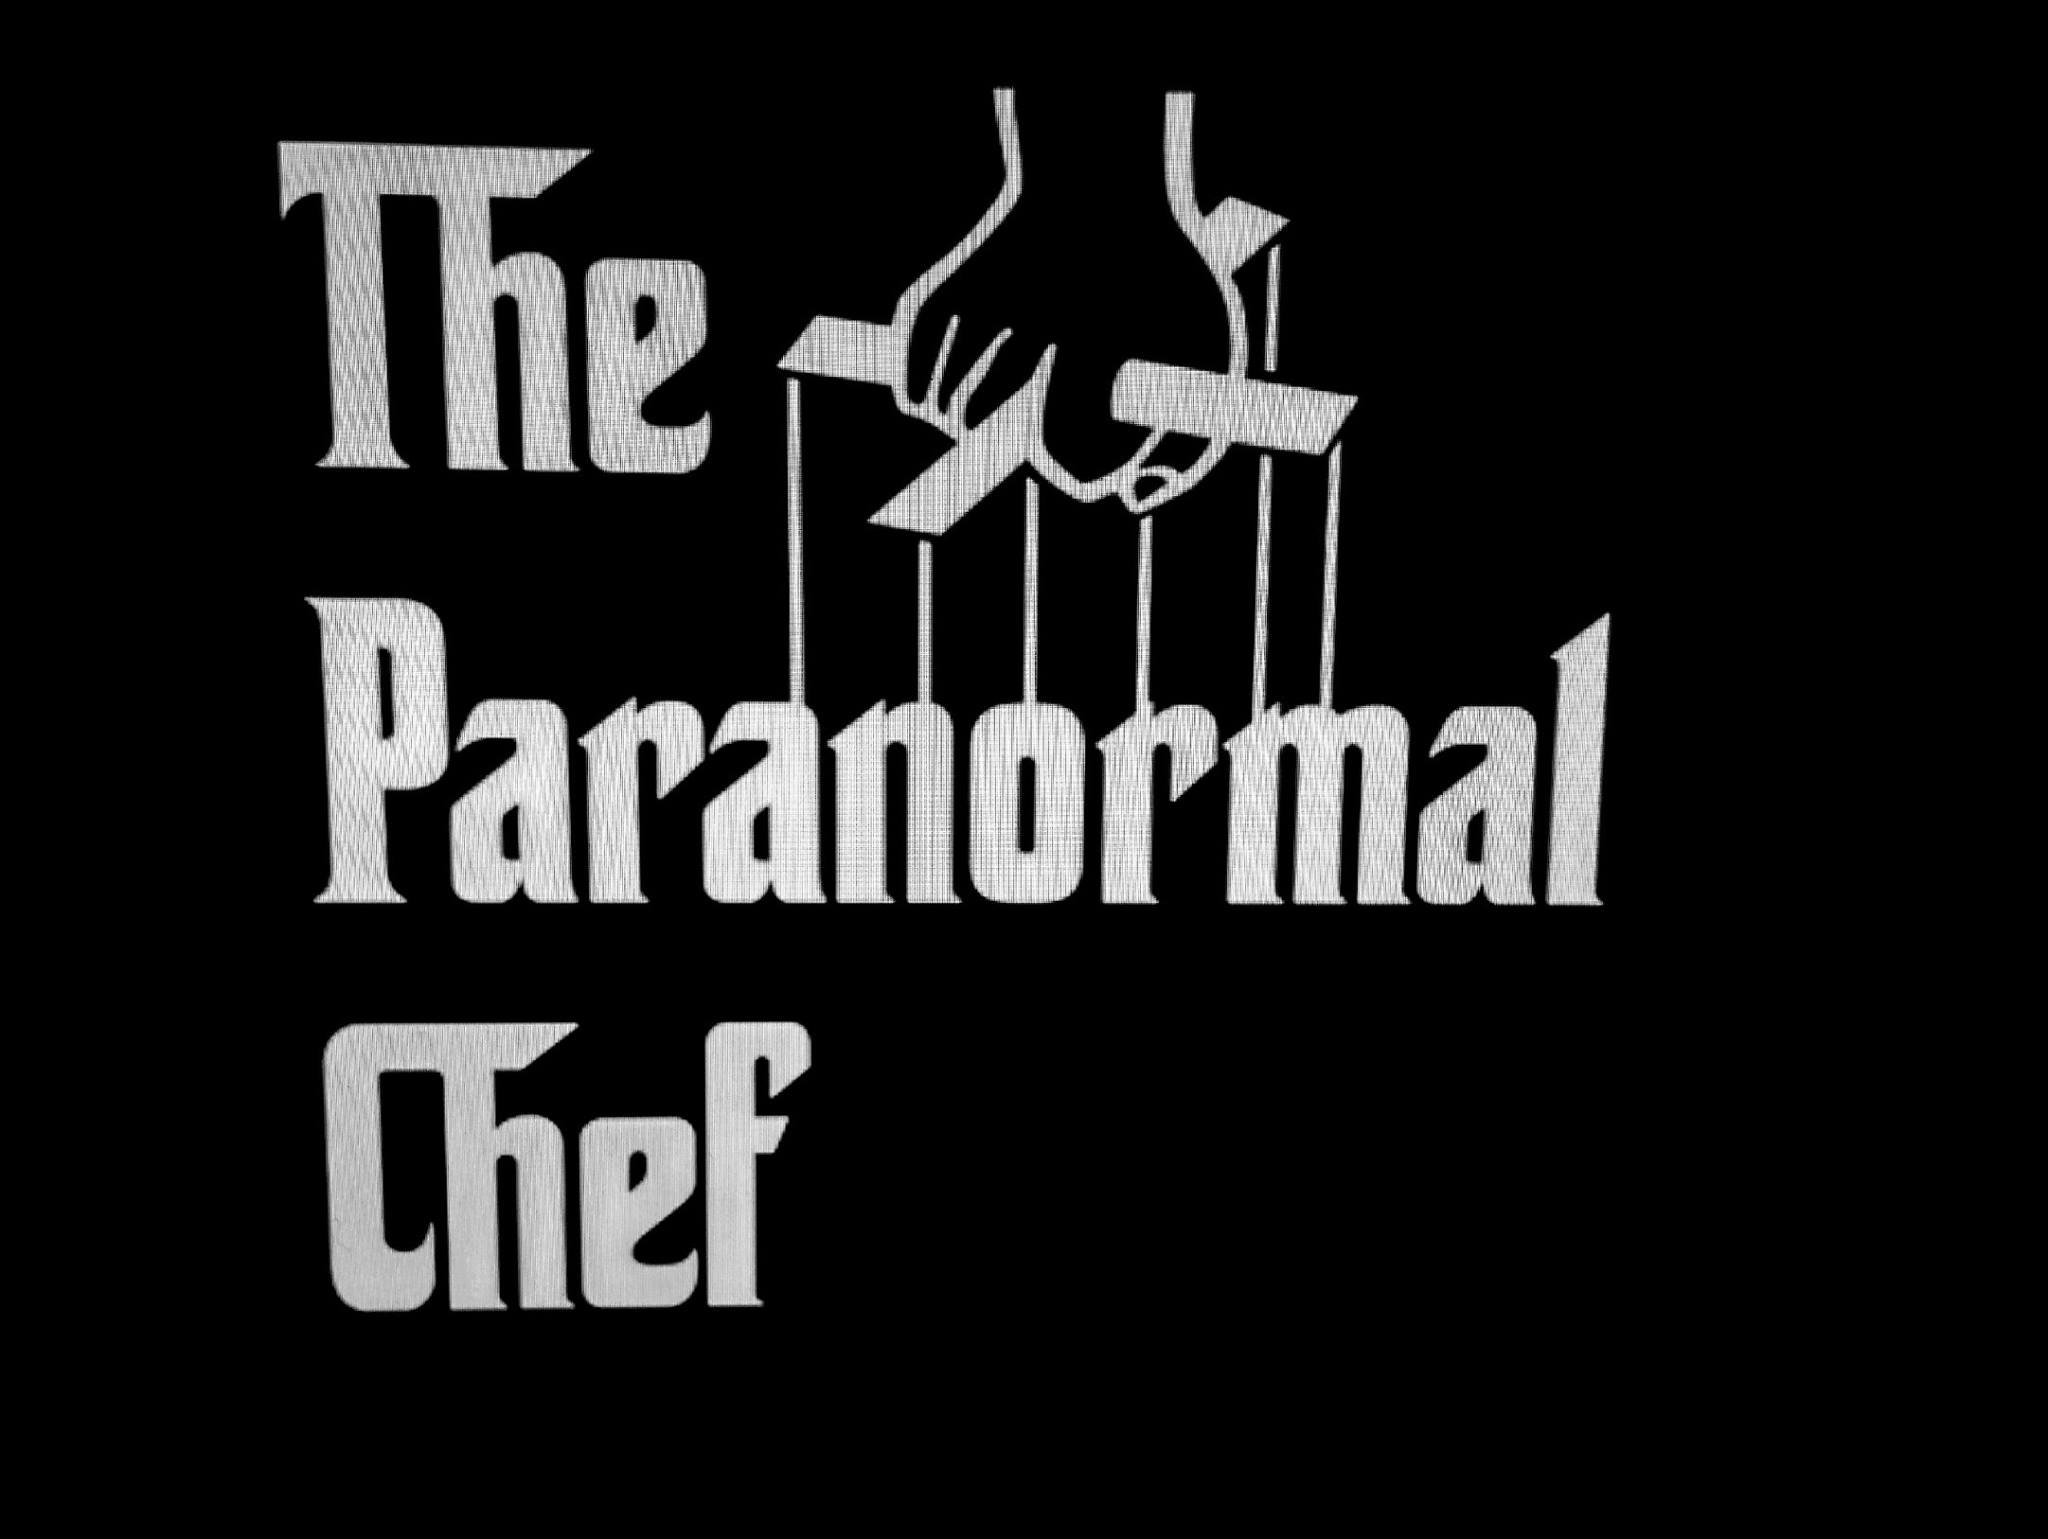 The Paranormal Chef